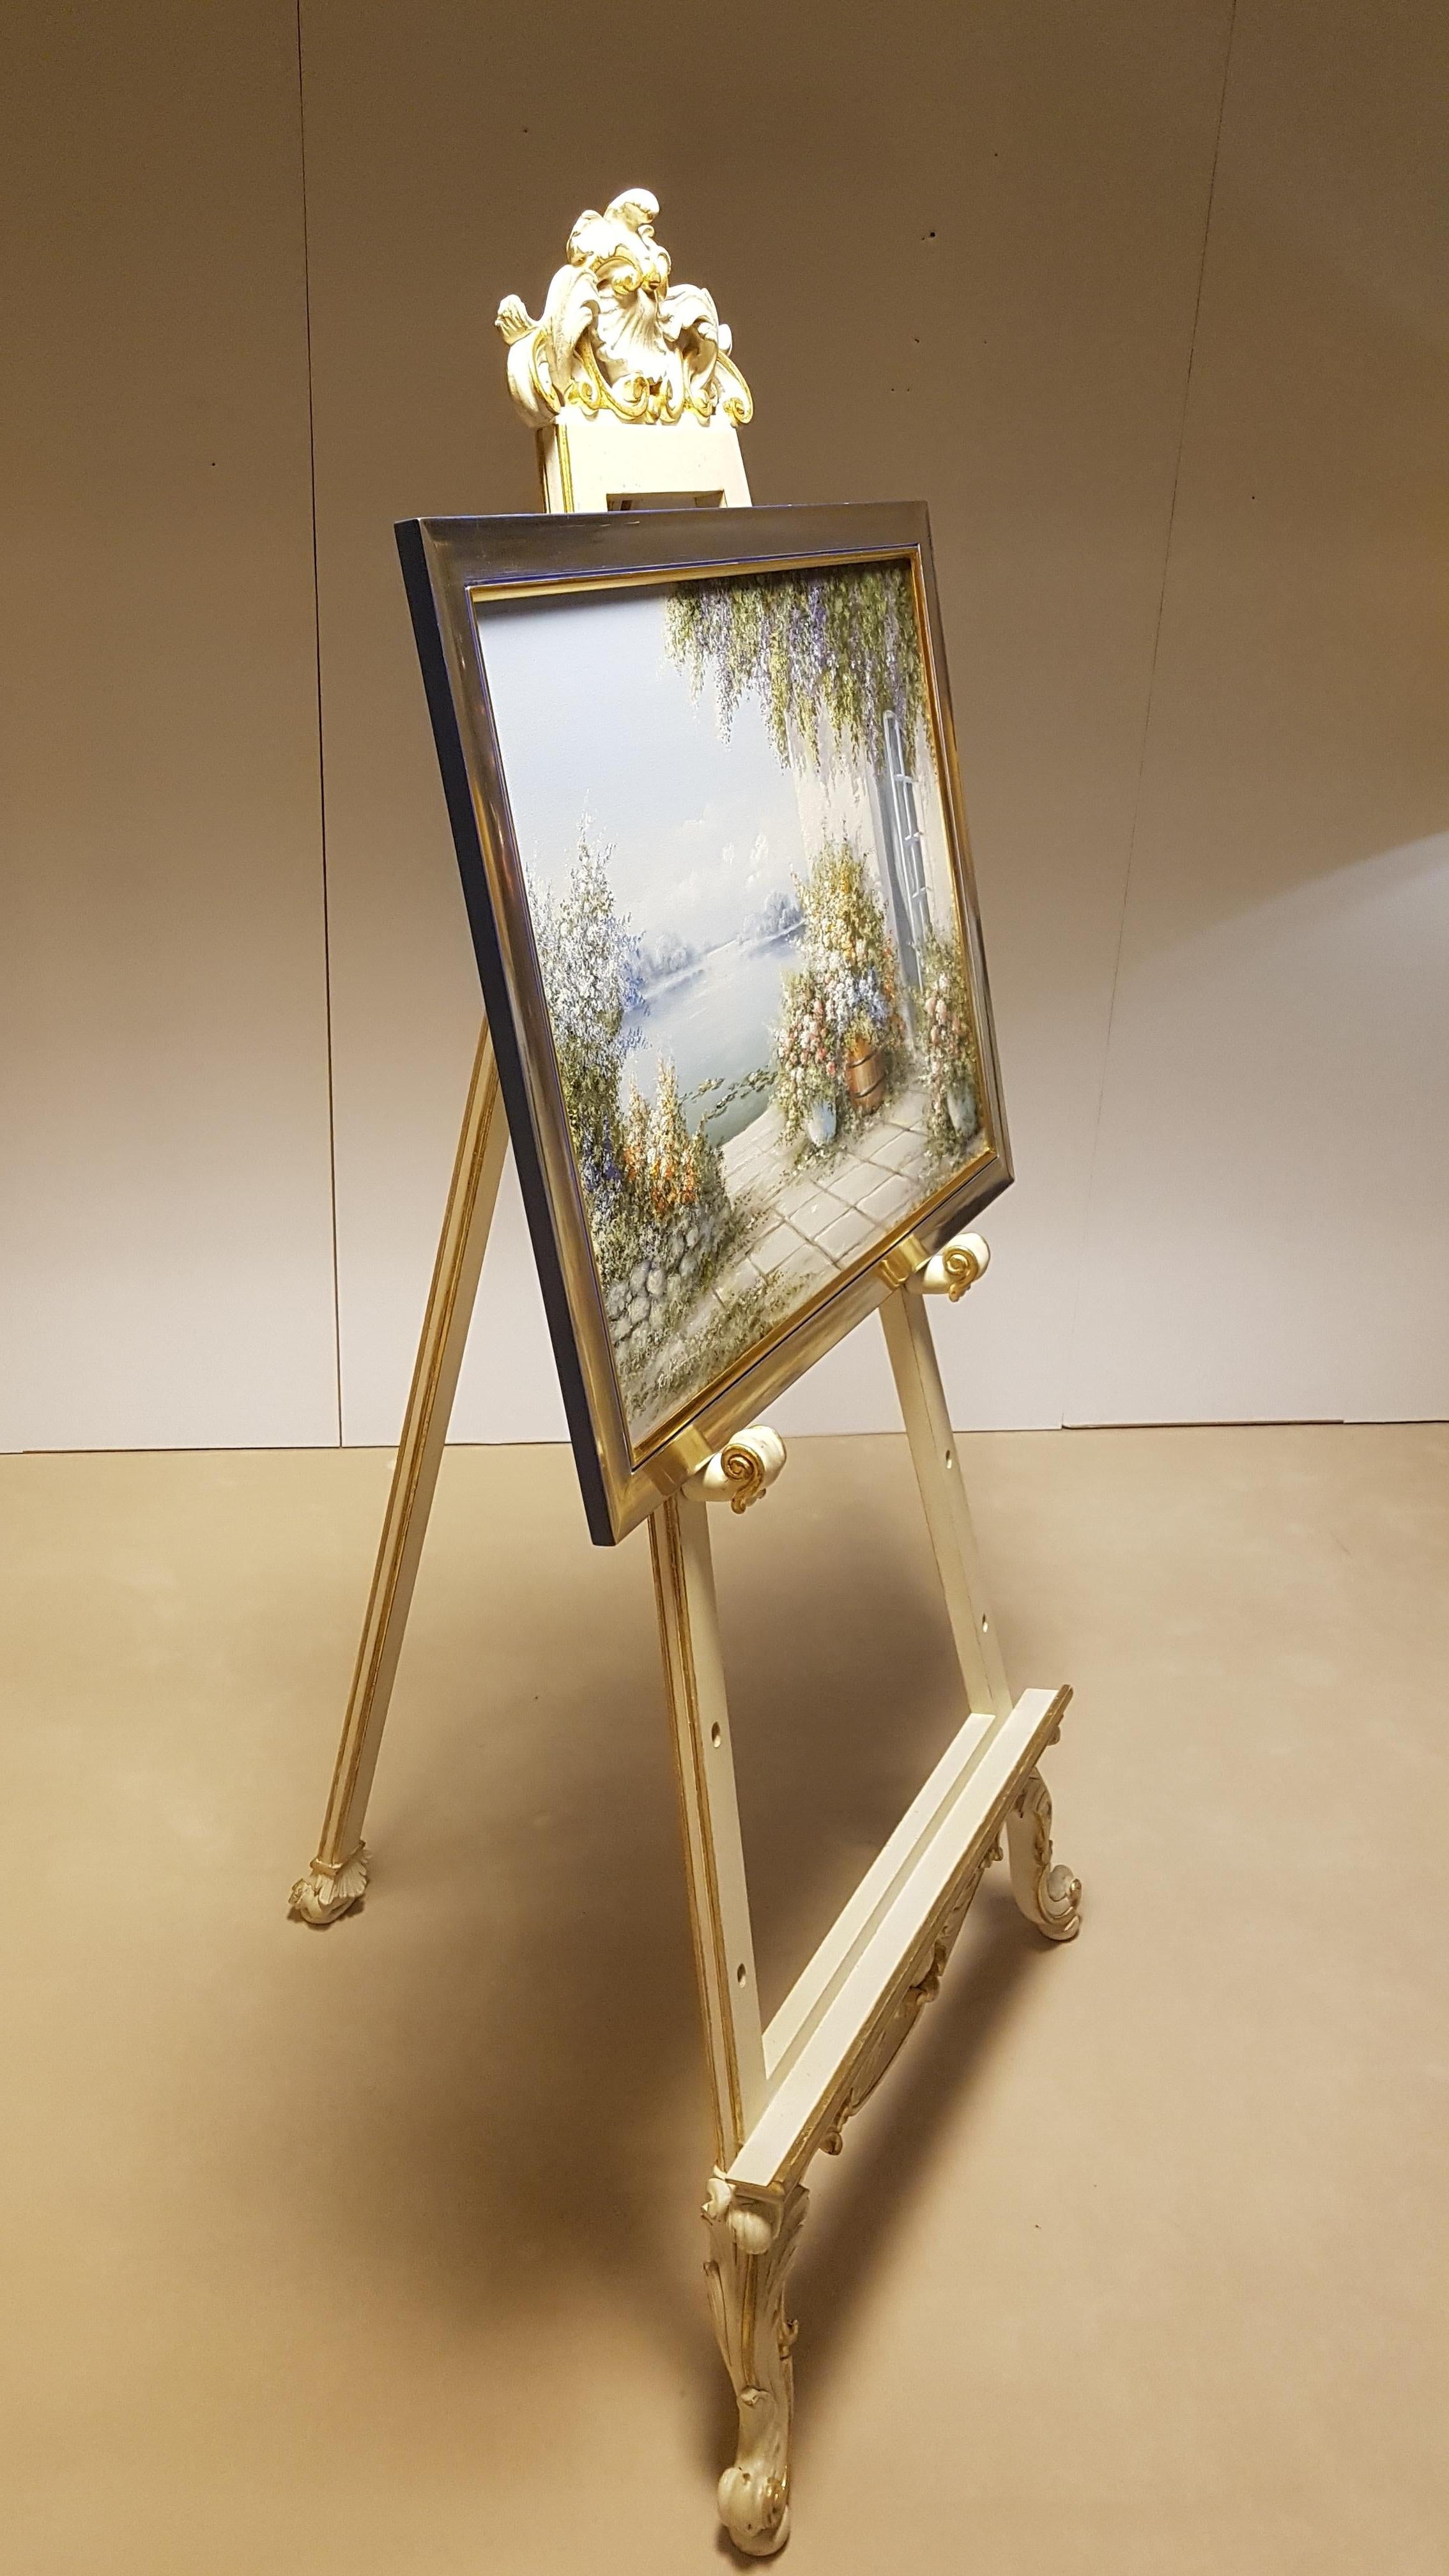 Beautiful and elegant Jugendstil easel finished with white and gold lacquer. Offers detailed carved ornamentation on the top, feet and the adjustable middle part. Fits different sized paintings.
Painting only for decorative purposes.